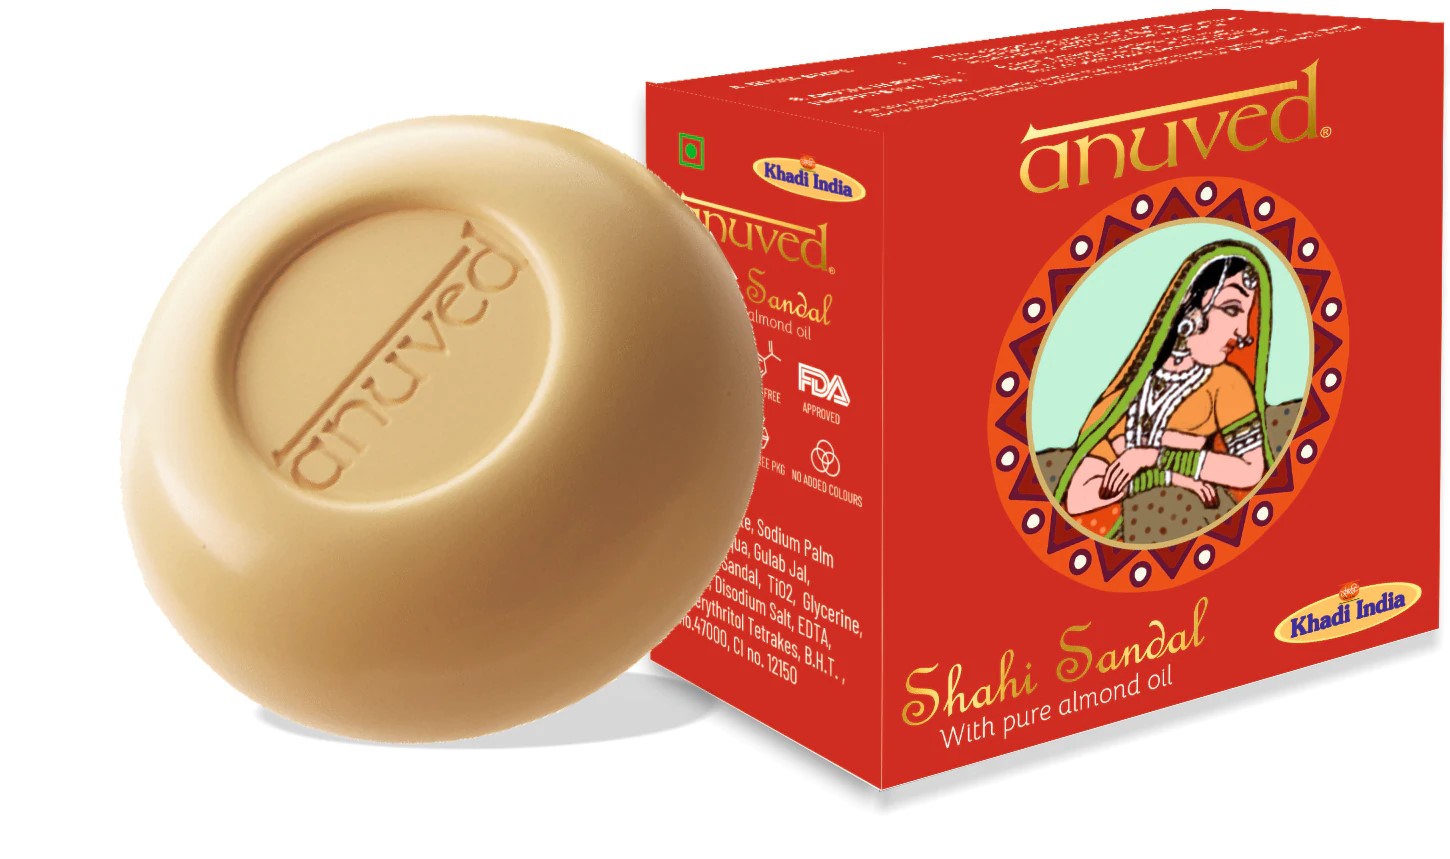 Anuved Herbal Shahi Sandal soap with pure Sandalwood & Almond Oil enriched with Rishikesh Gangajal for Soft & Glowing Skin - 125 gm